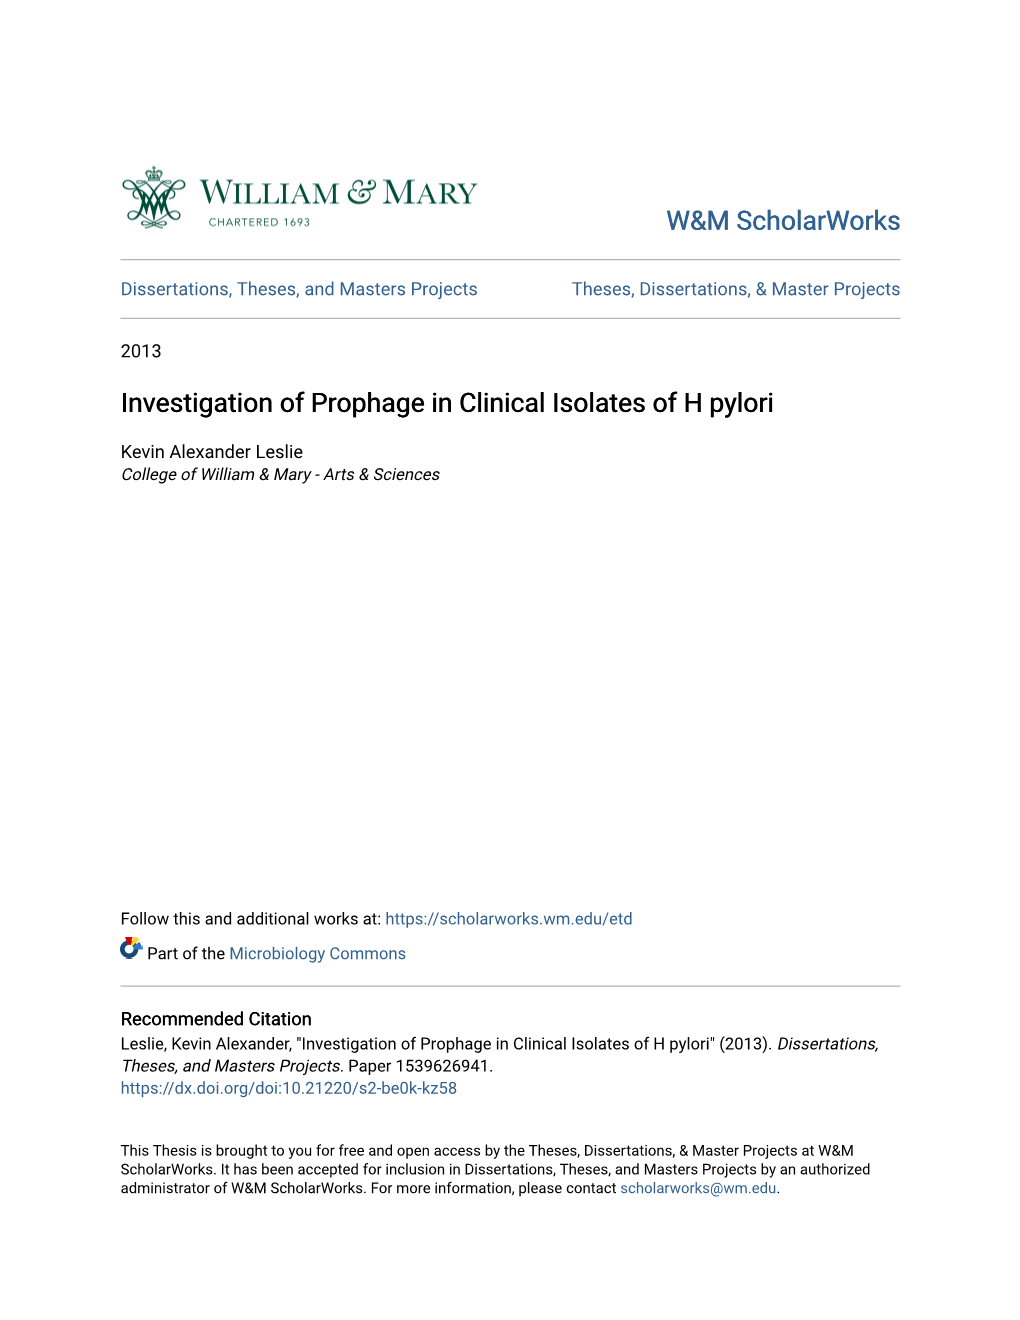 Investigation of Prophage in Clinical Isolates of H Pylori